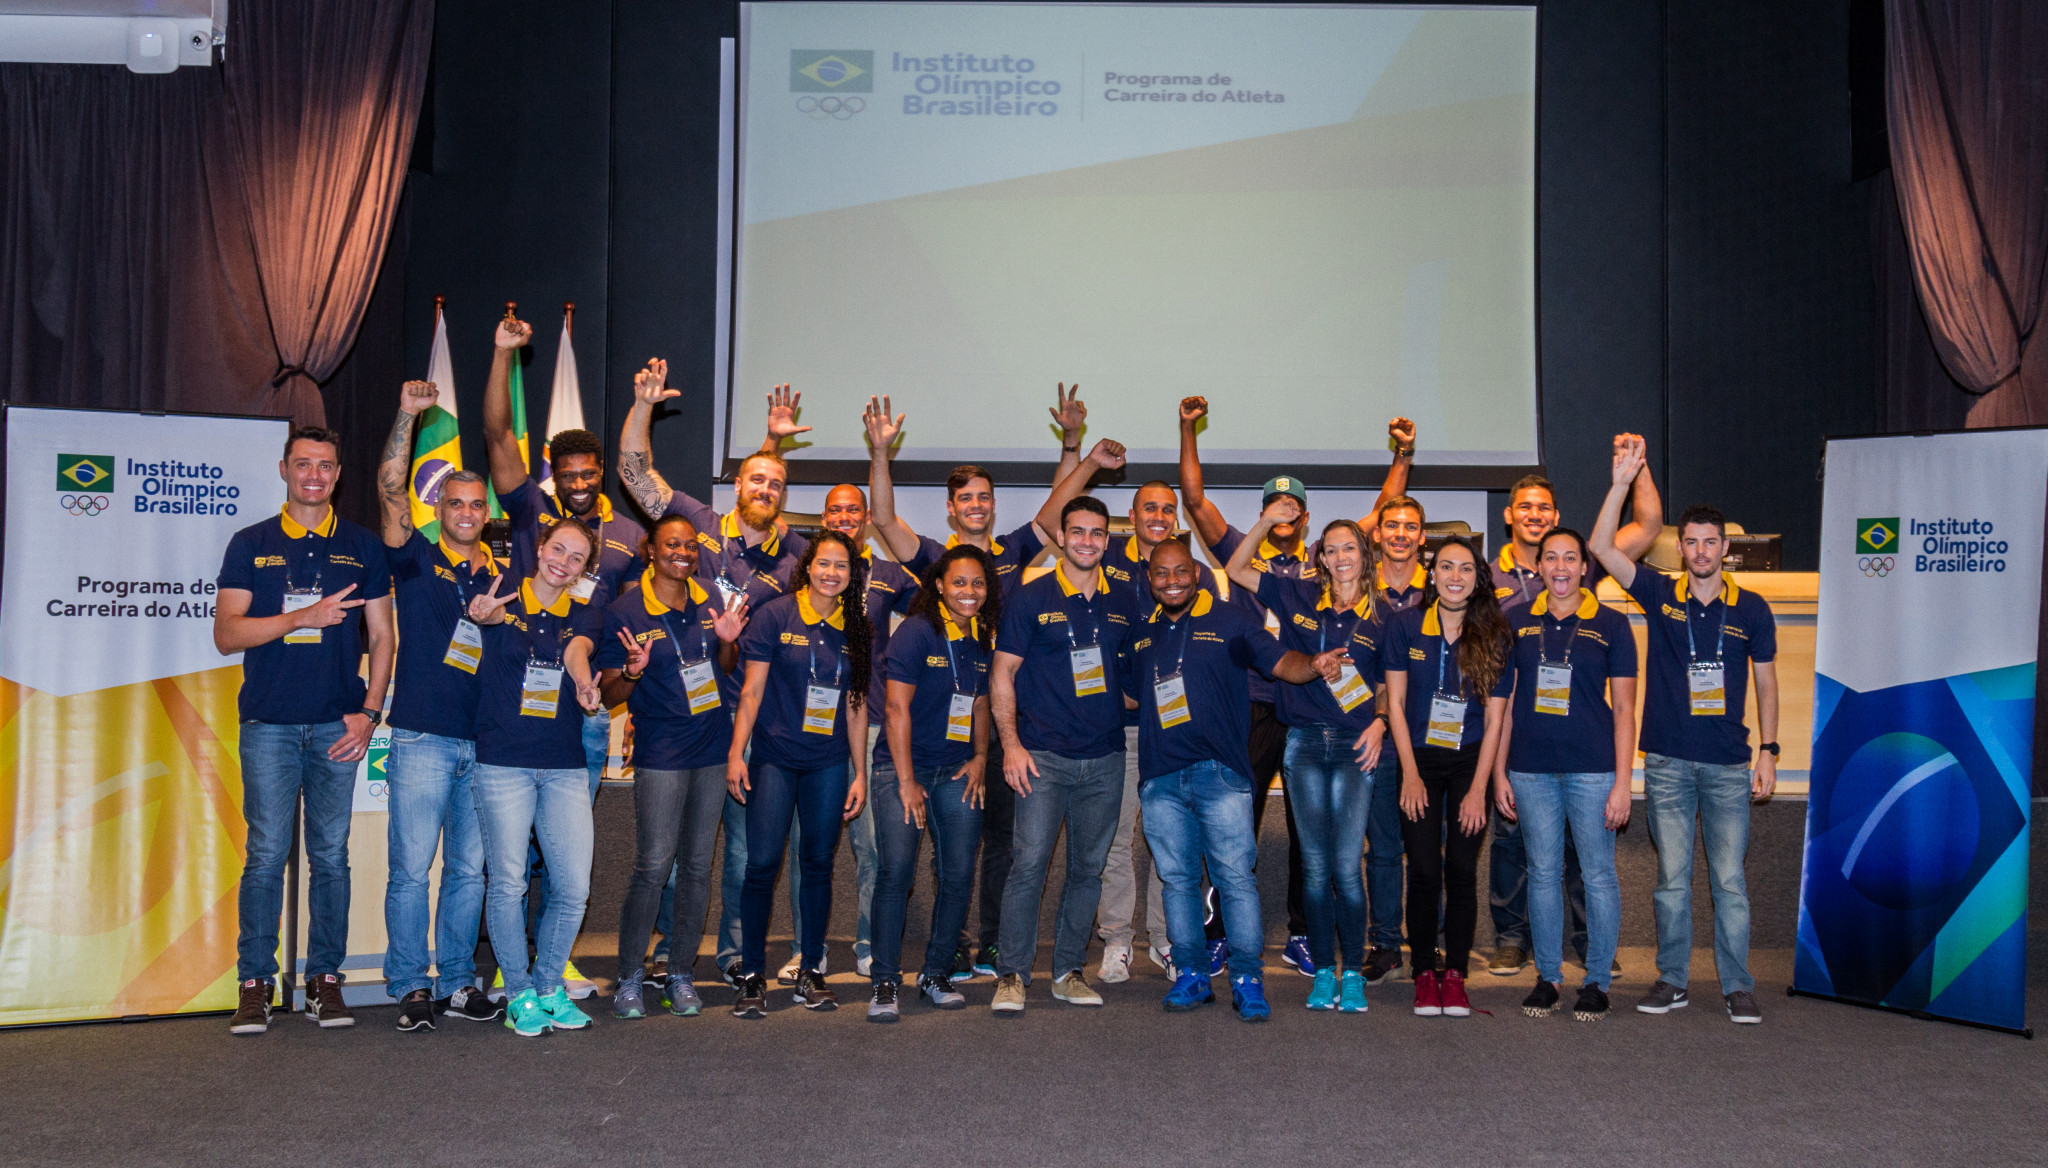 Brazilian Olympic Committee launch sixth edition of Athlete Career Programme